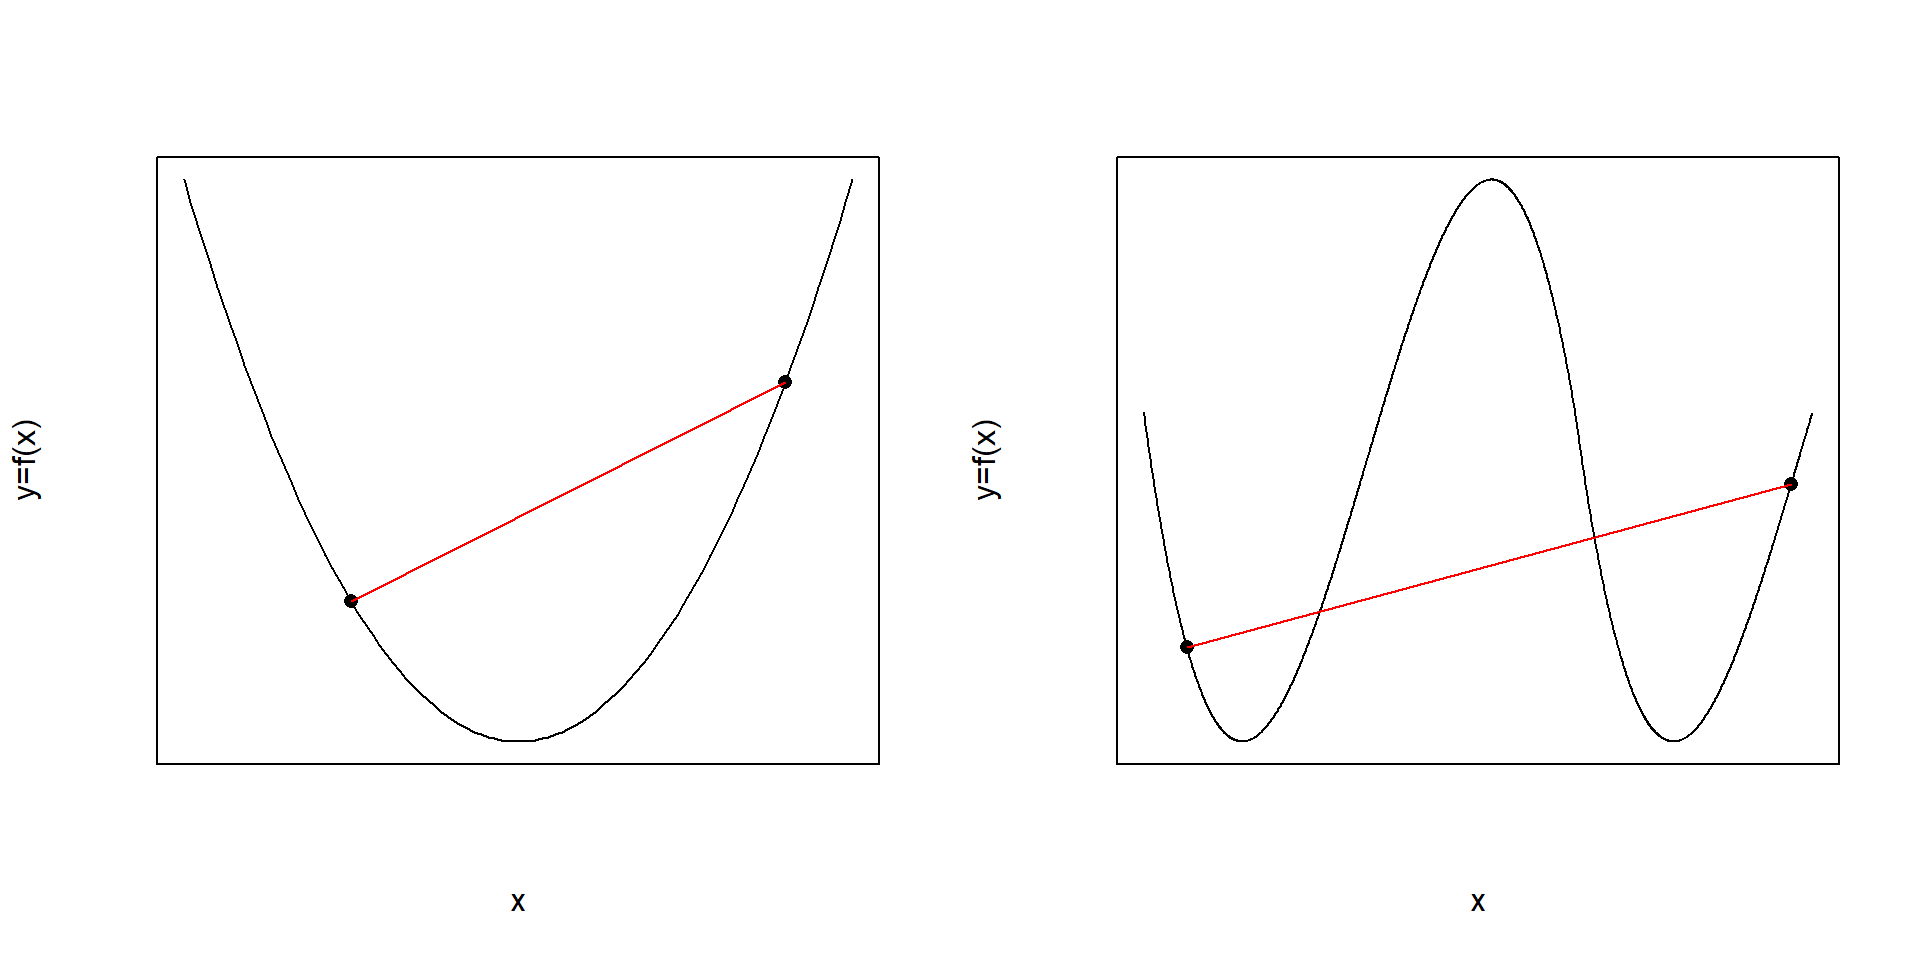 Convex (left panel) and non-convex (right panel) functions. Non-convexity on the right panel always imply some pairs of points on the graph which cannot be connected without intersecting the functions graph.